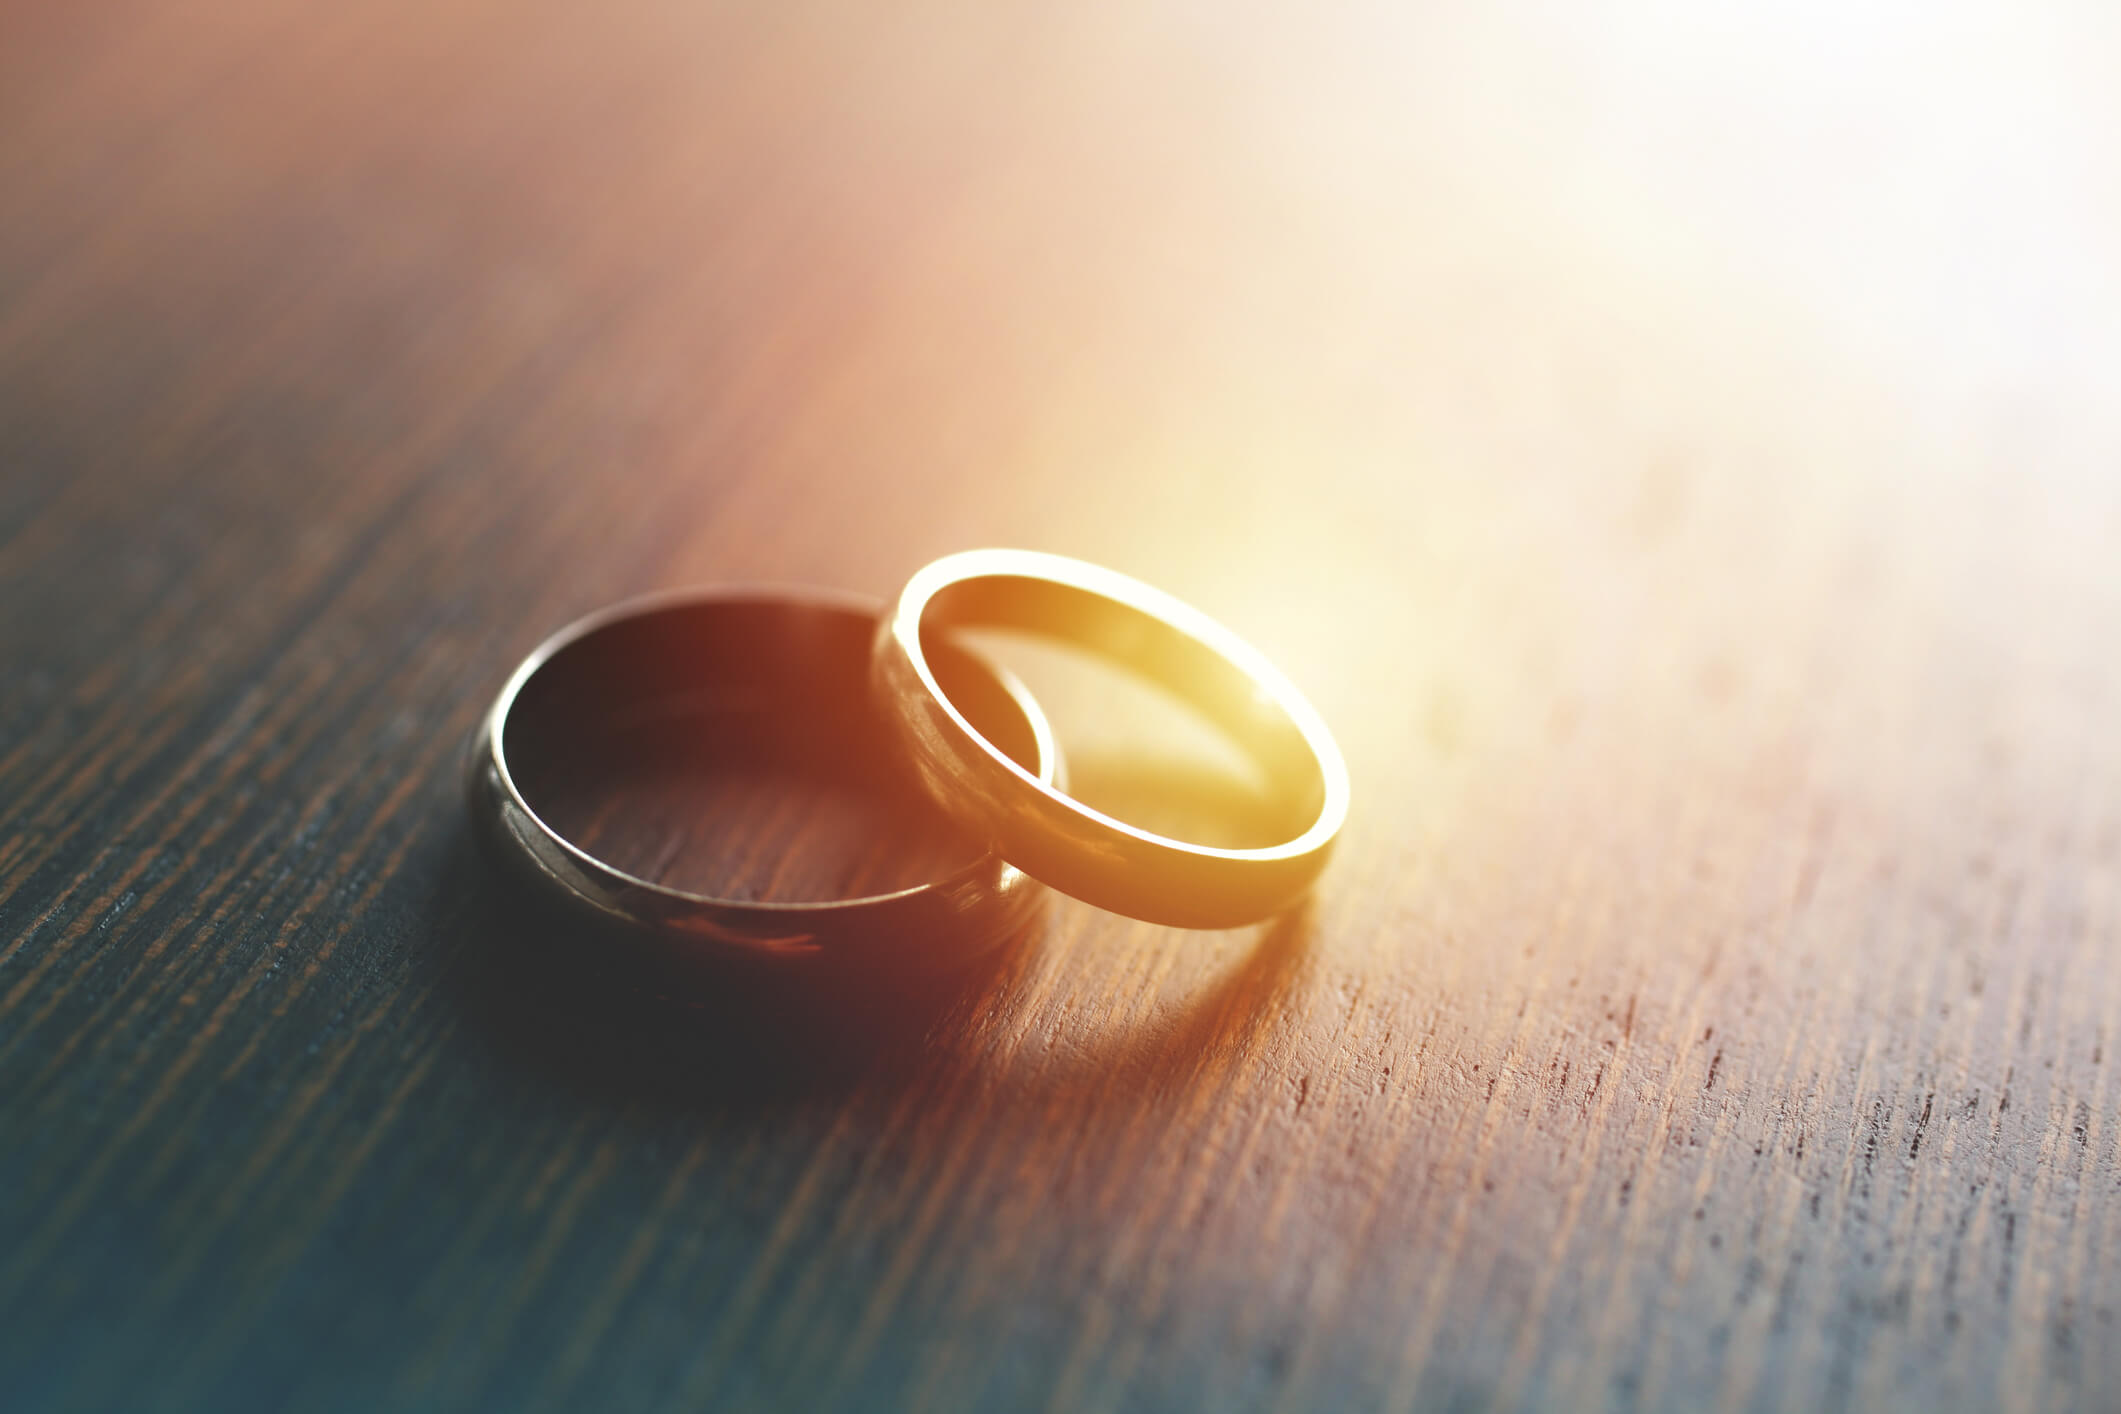 Close-up of wedding rings on table with sunlight.